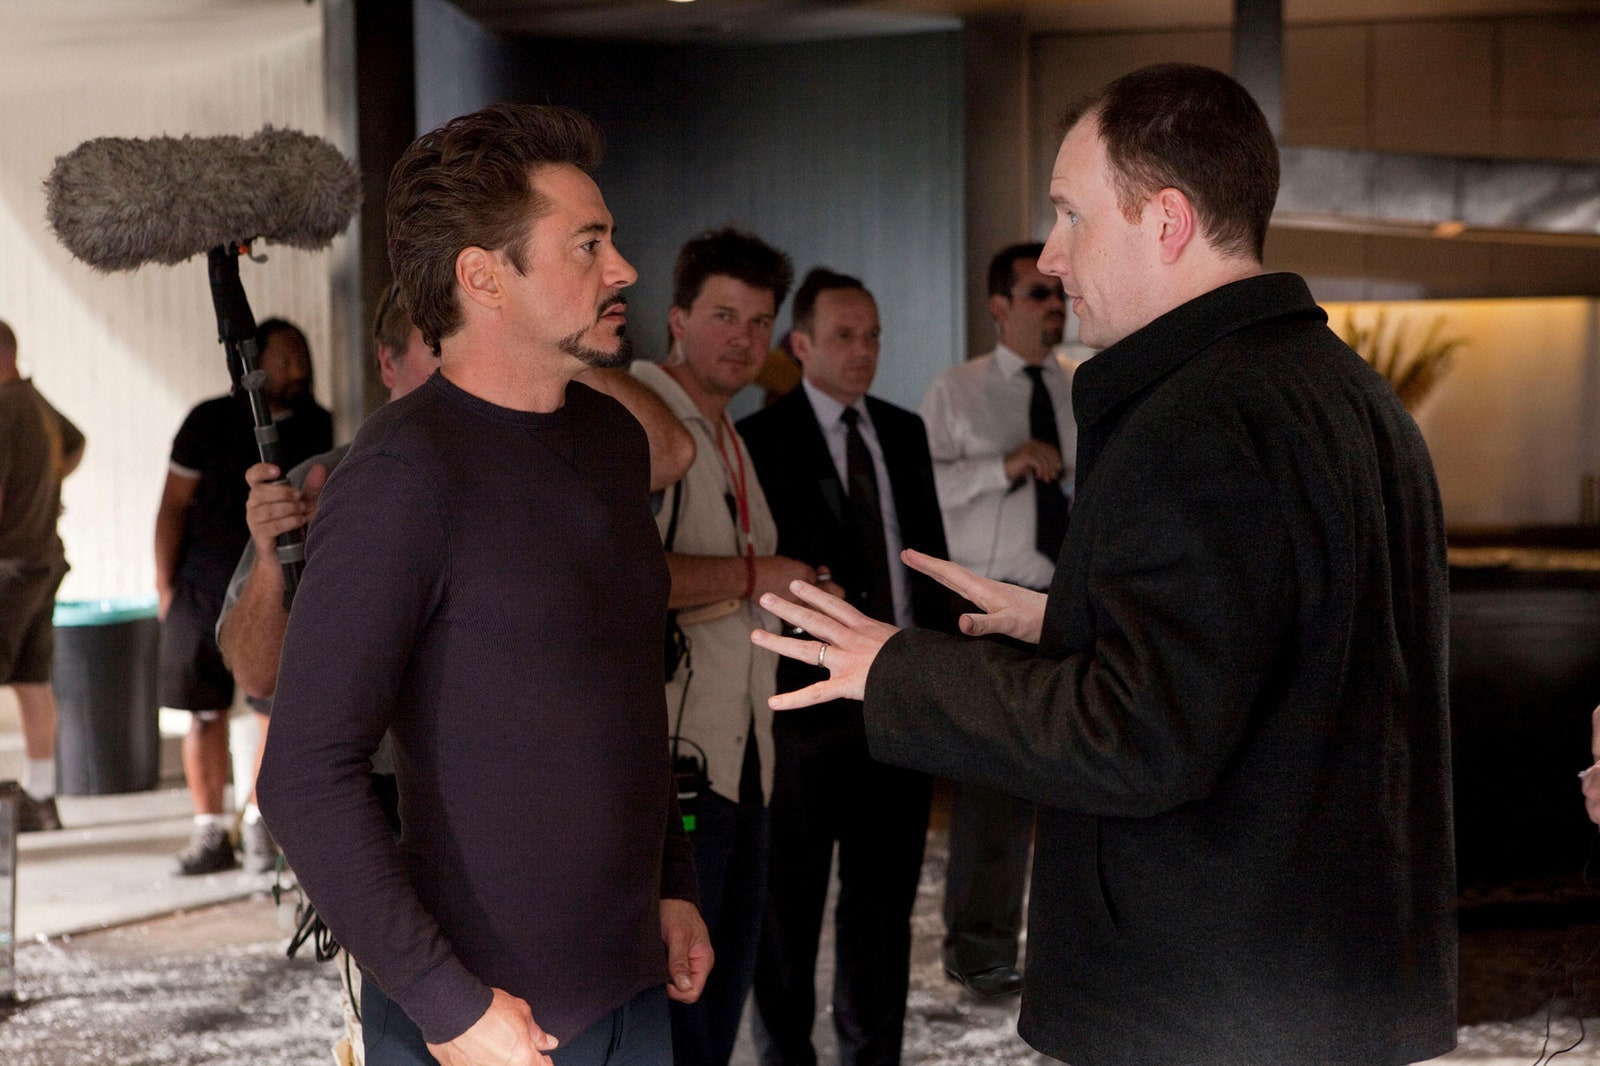 Robert Downey Jr. and producerMarvel president Kevin Feige on the set of Iron Man 2.